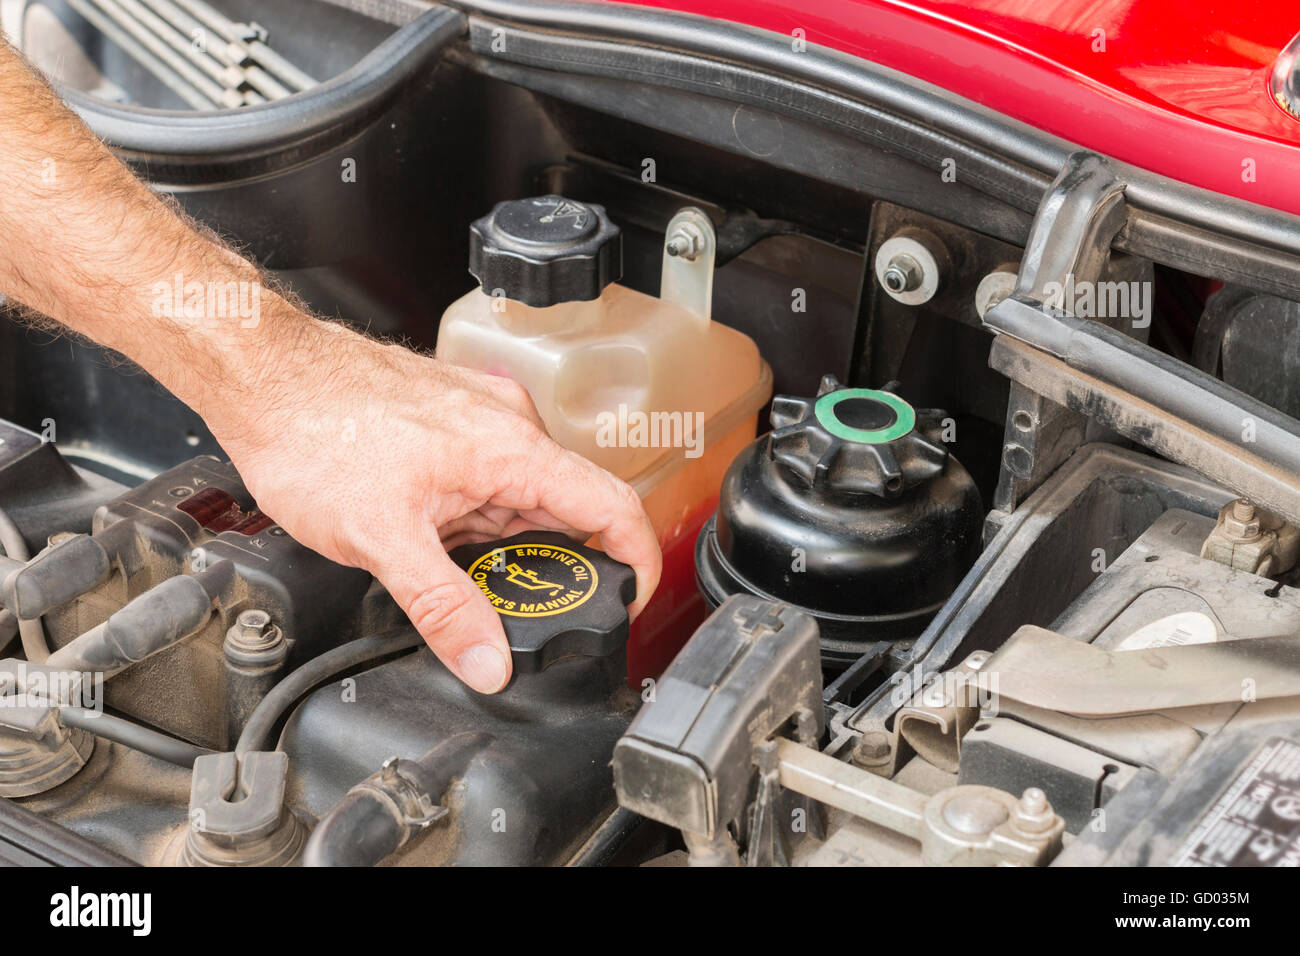 check engine oil car in shop Stock Photo